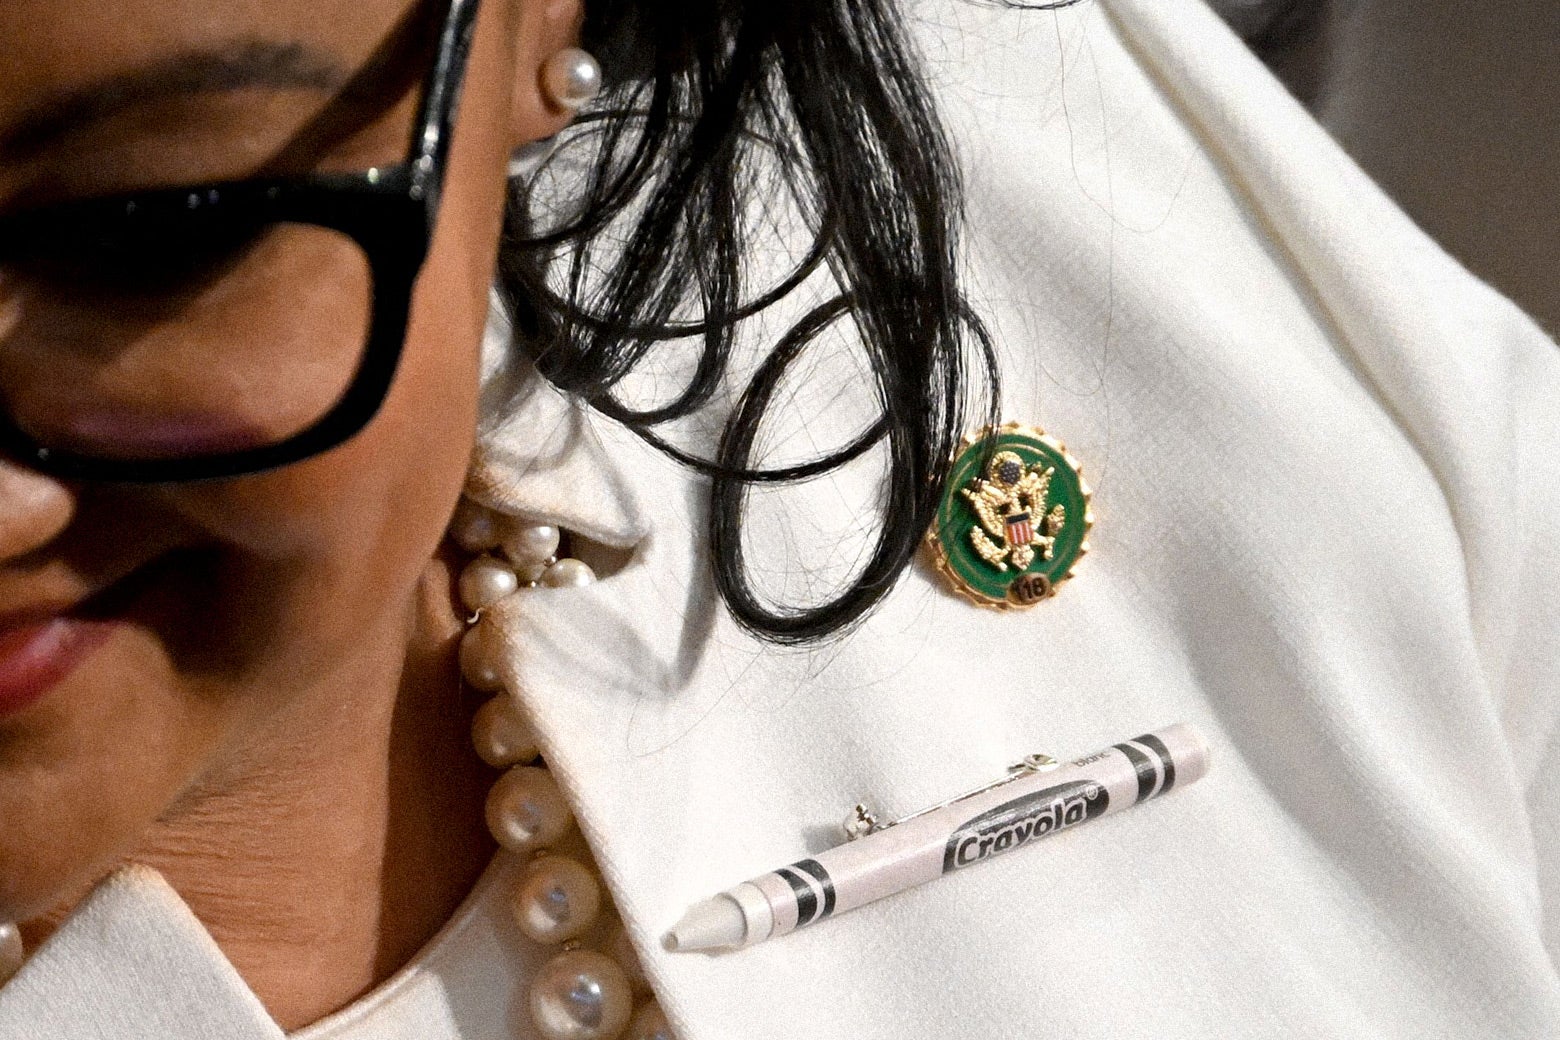 A close-up of a green pin for the 118th Congress on a lawmaker's lapel.